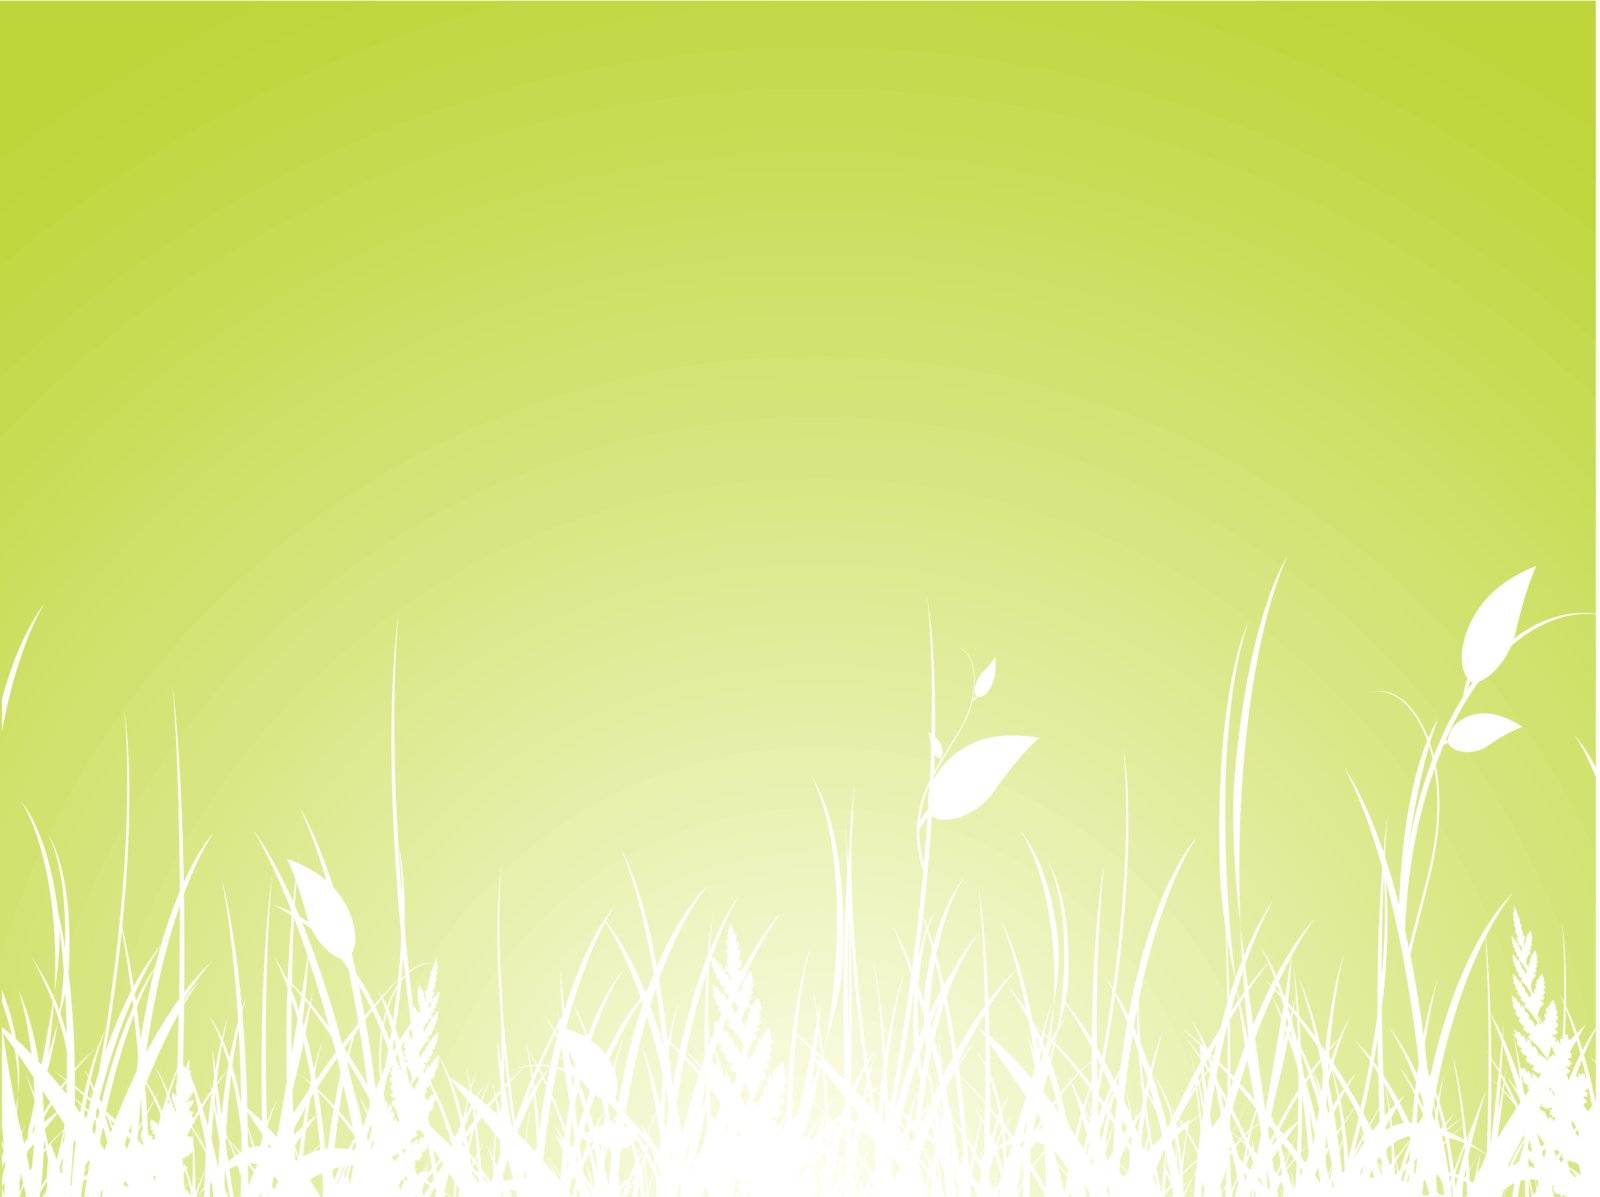 Grass Meadow Silhouette Over Green Background, Copy Space